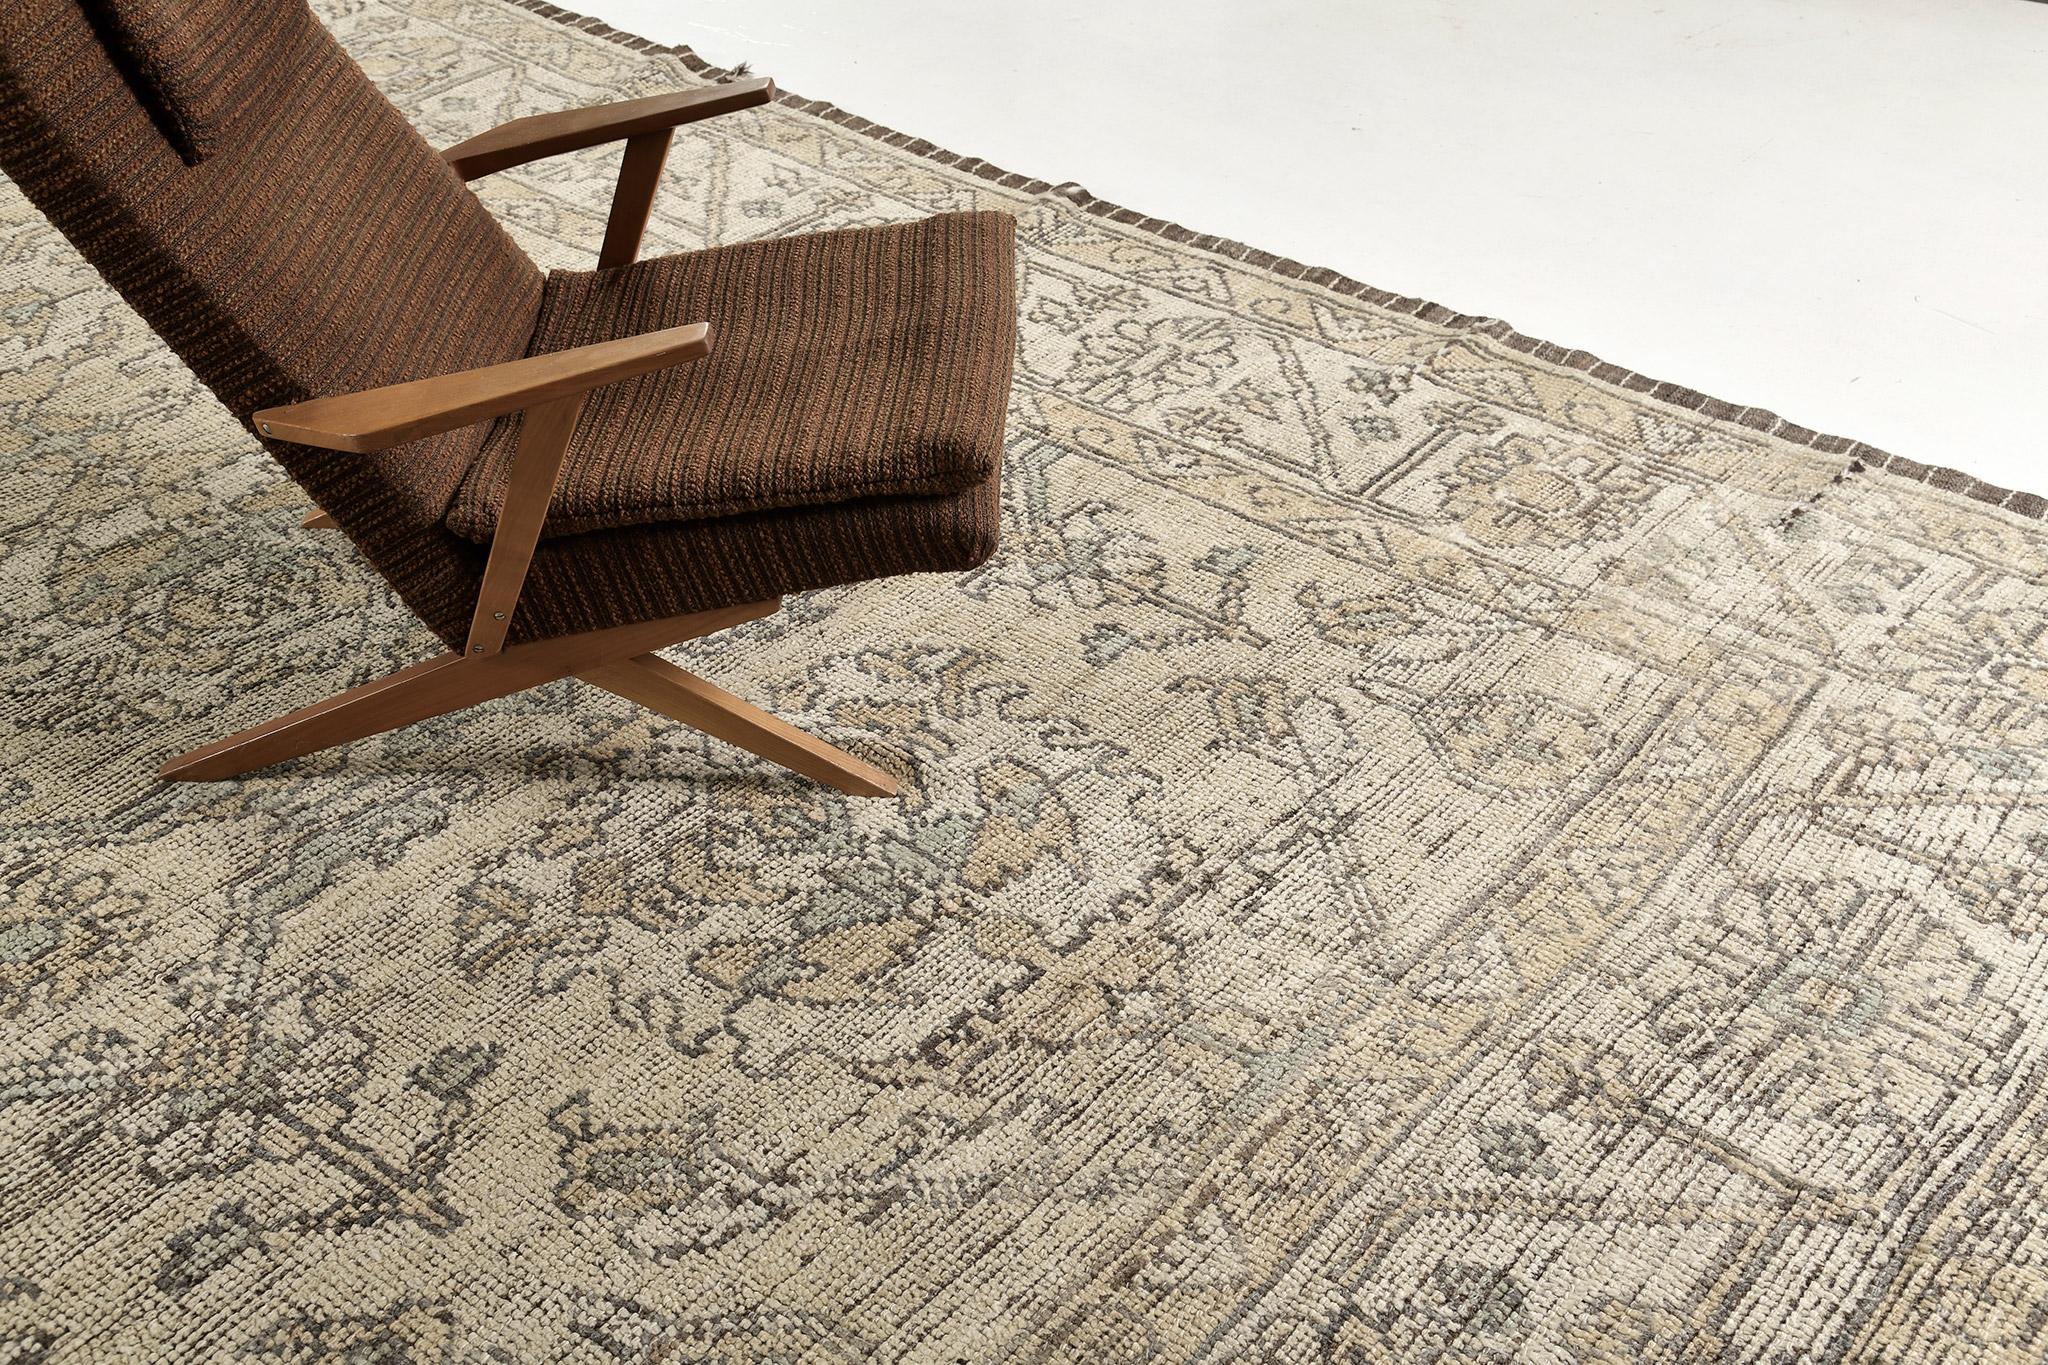 An alluring Oushak design revival rug that has an intricate and timeless pattern. Featuring the collaboration of muted tones of hazel wood and cream, this bewildering rug is composed with enchanting graceful florid elements that create a symmetrical